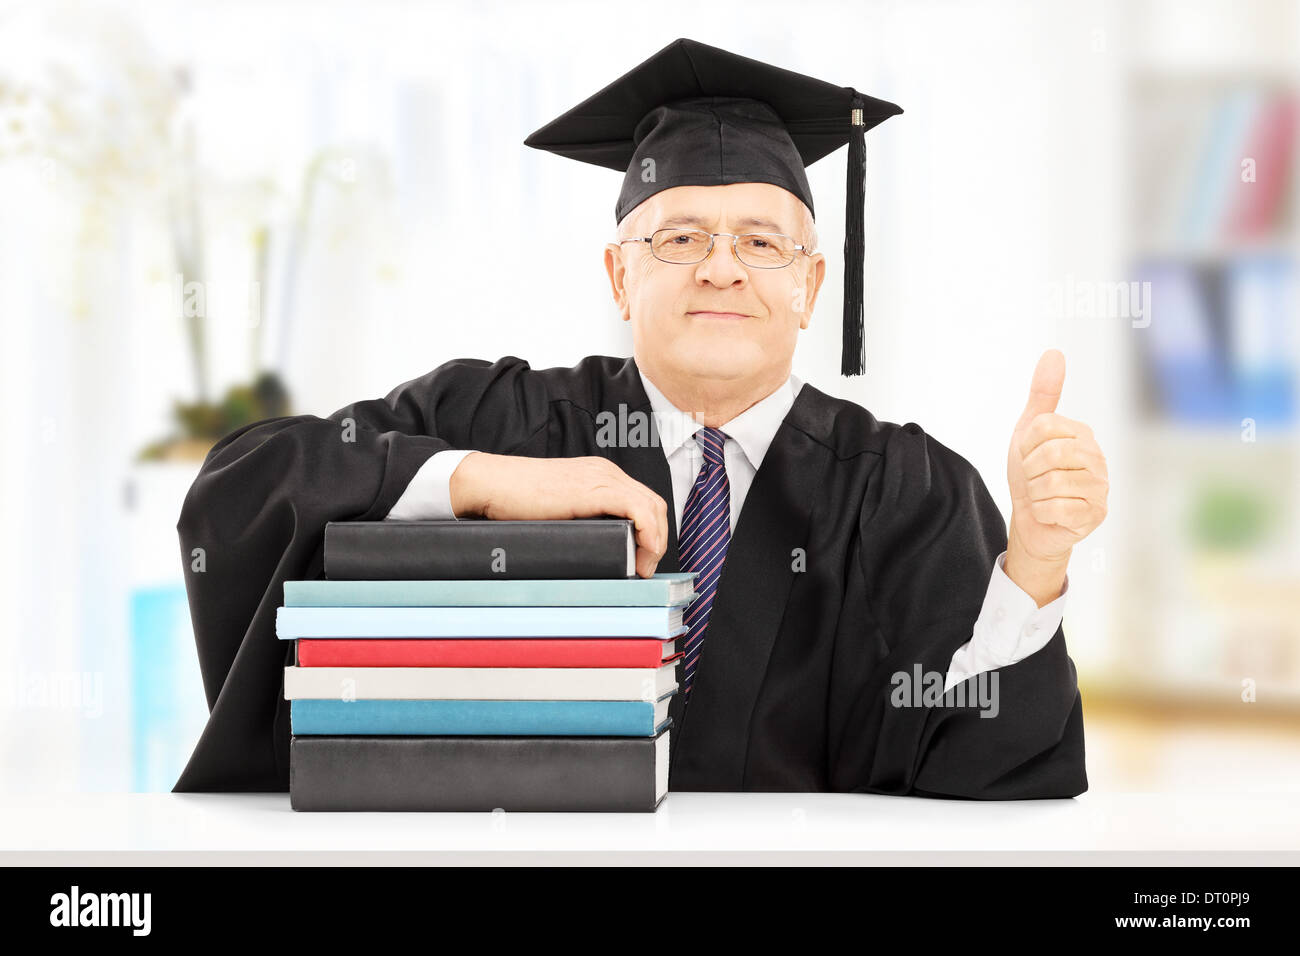 Middle aged college professor seated on table with stack of books and giving thumb up Stock Photo